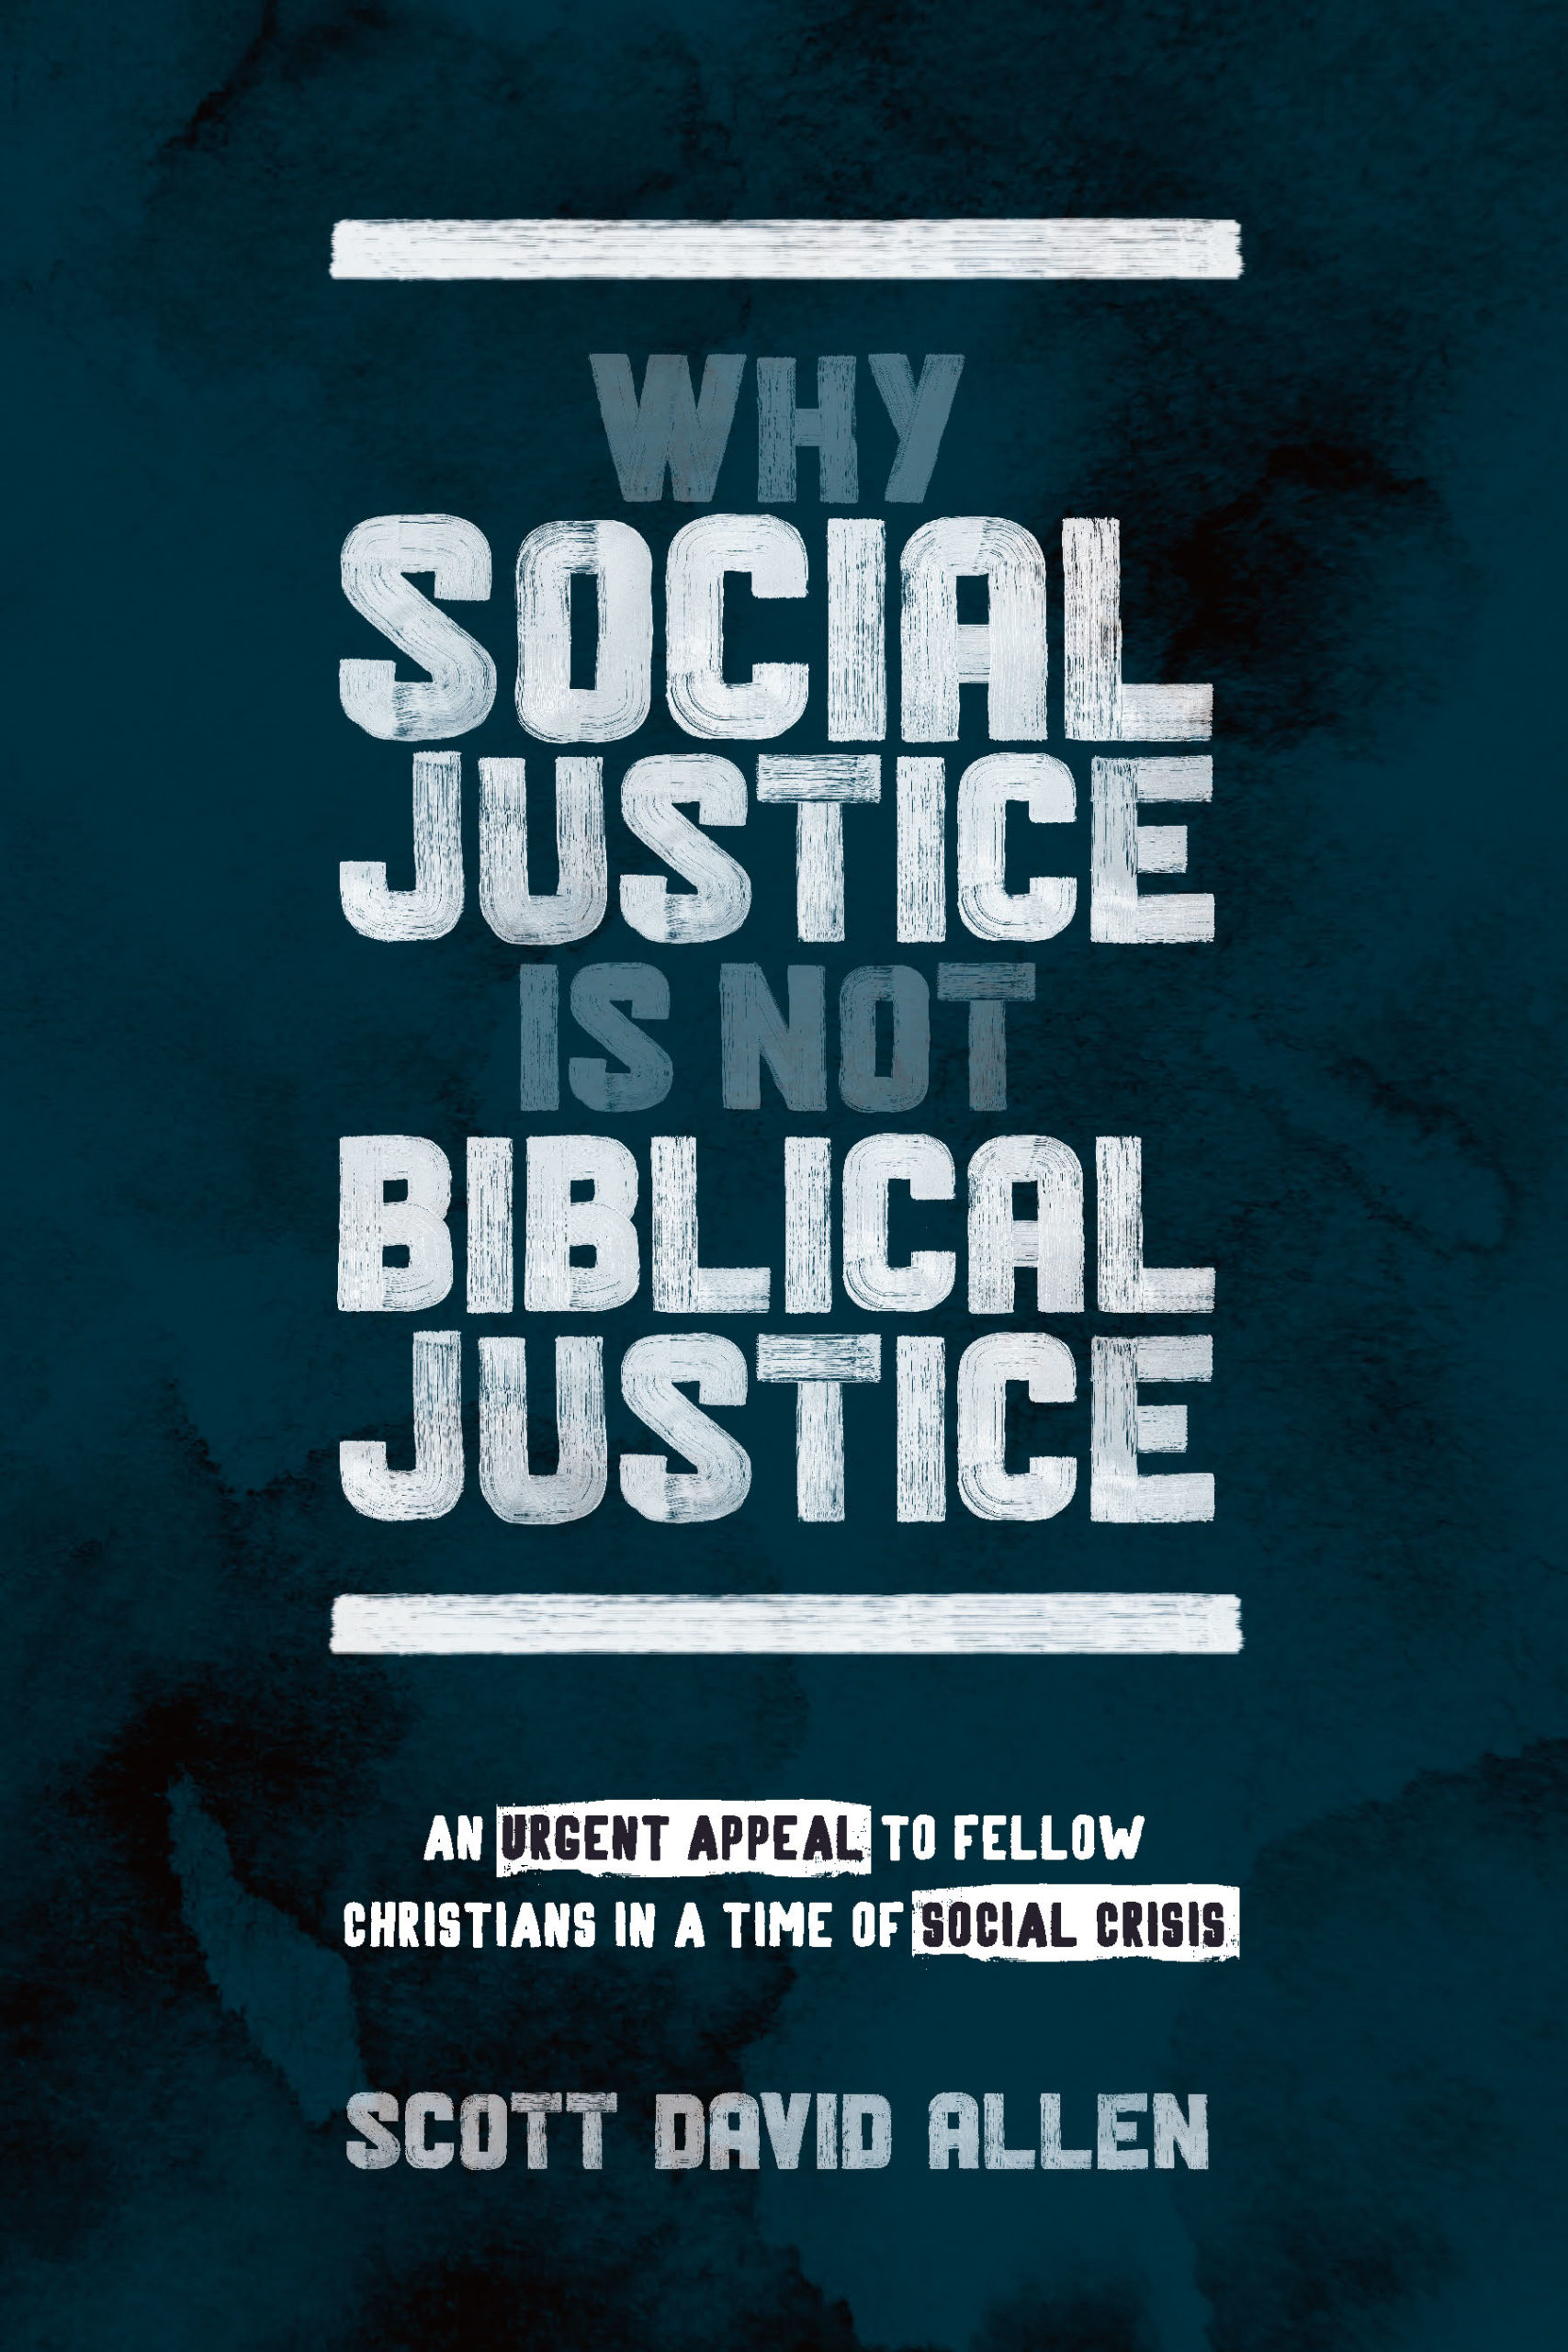 why social justice is not biblical justice